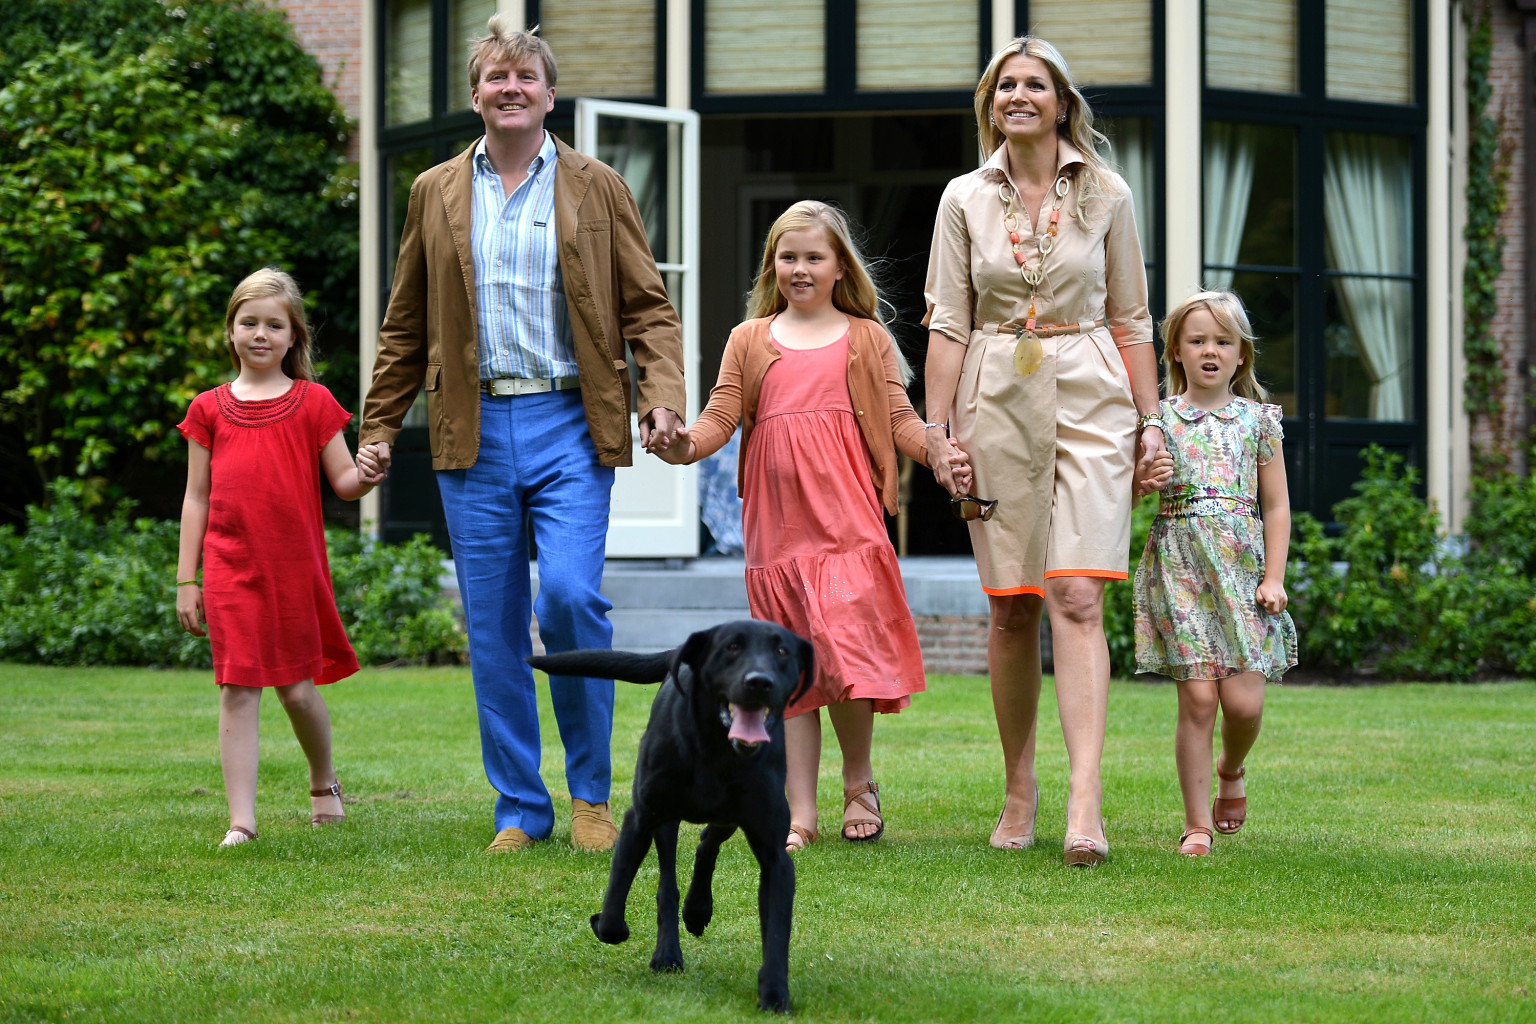 Dutch Royal Family Portraits Show Off Queen Maxima's Stylish Brood